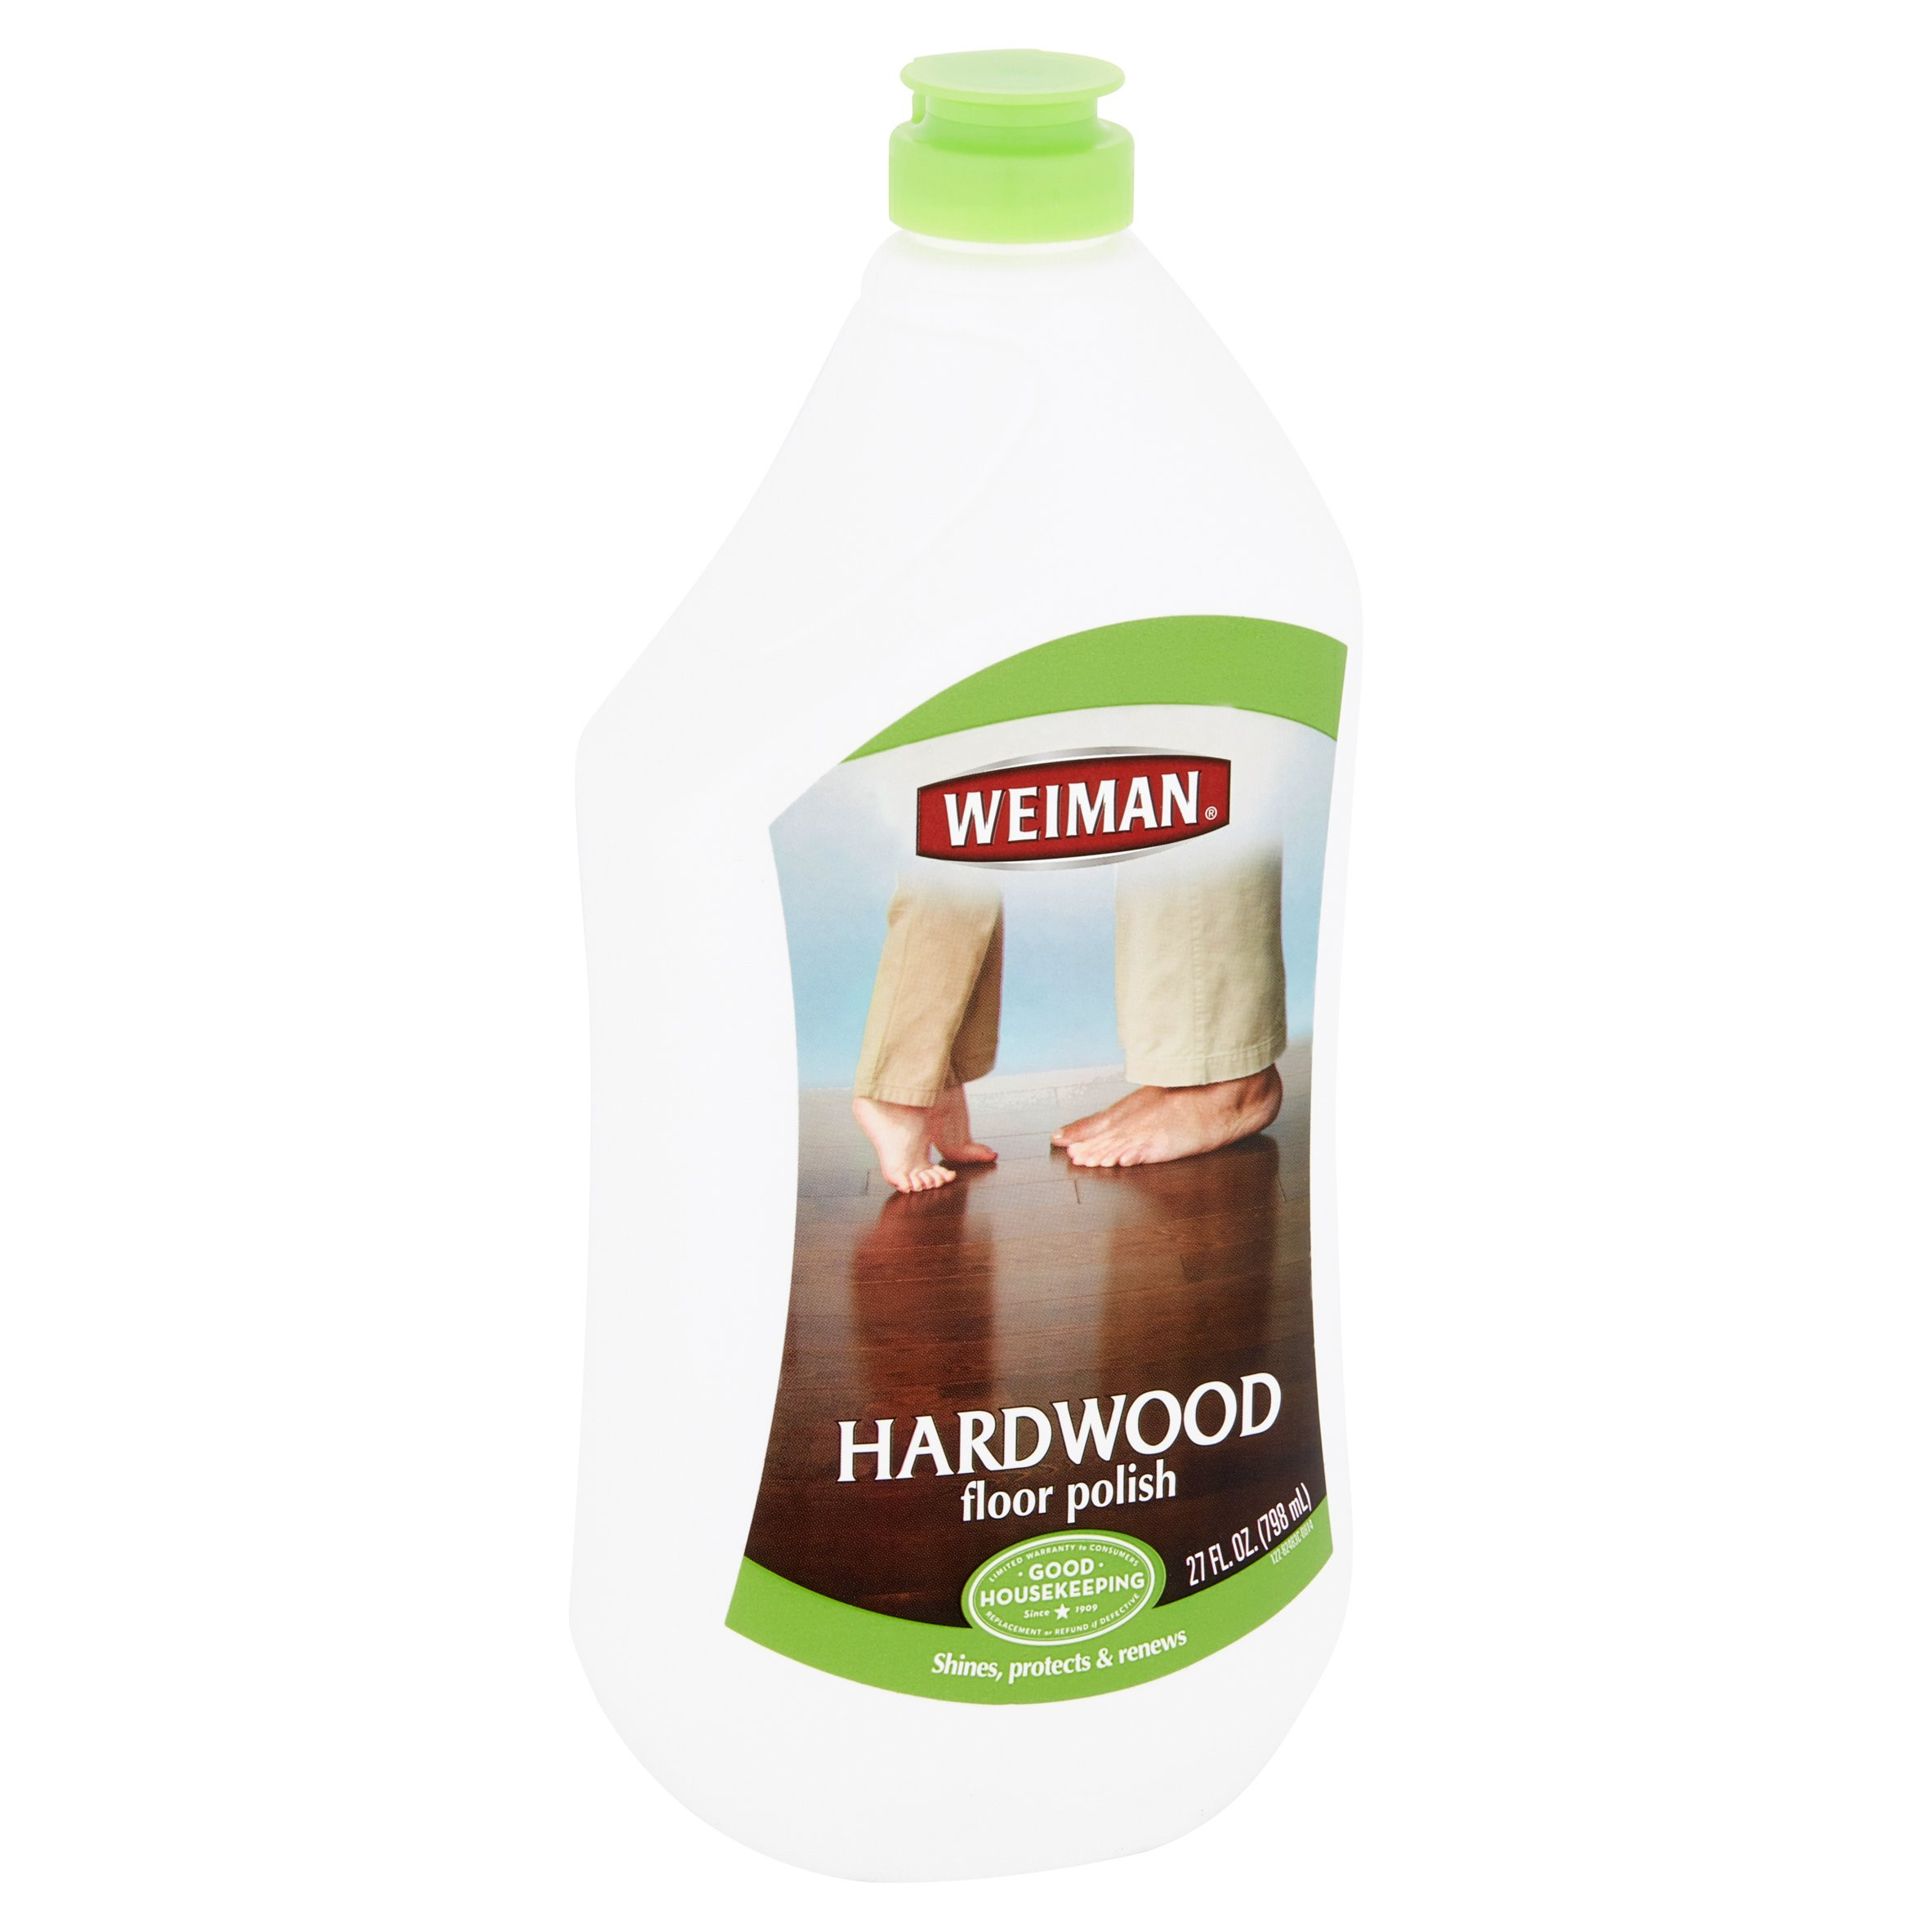 12 Perfect Hardwood Floor Care Scratches 2024 free download hardwood floor care scratches of weiman hardwood floor polish 27 oz walmart com intended for e3772481 6ecb 42fd 90cb a6883c38df54 1 14deb9d4c153dceb9f65f9a3409d6b3c